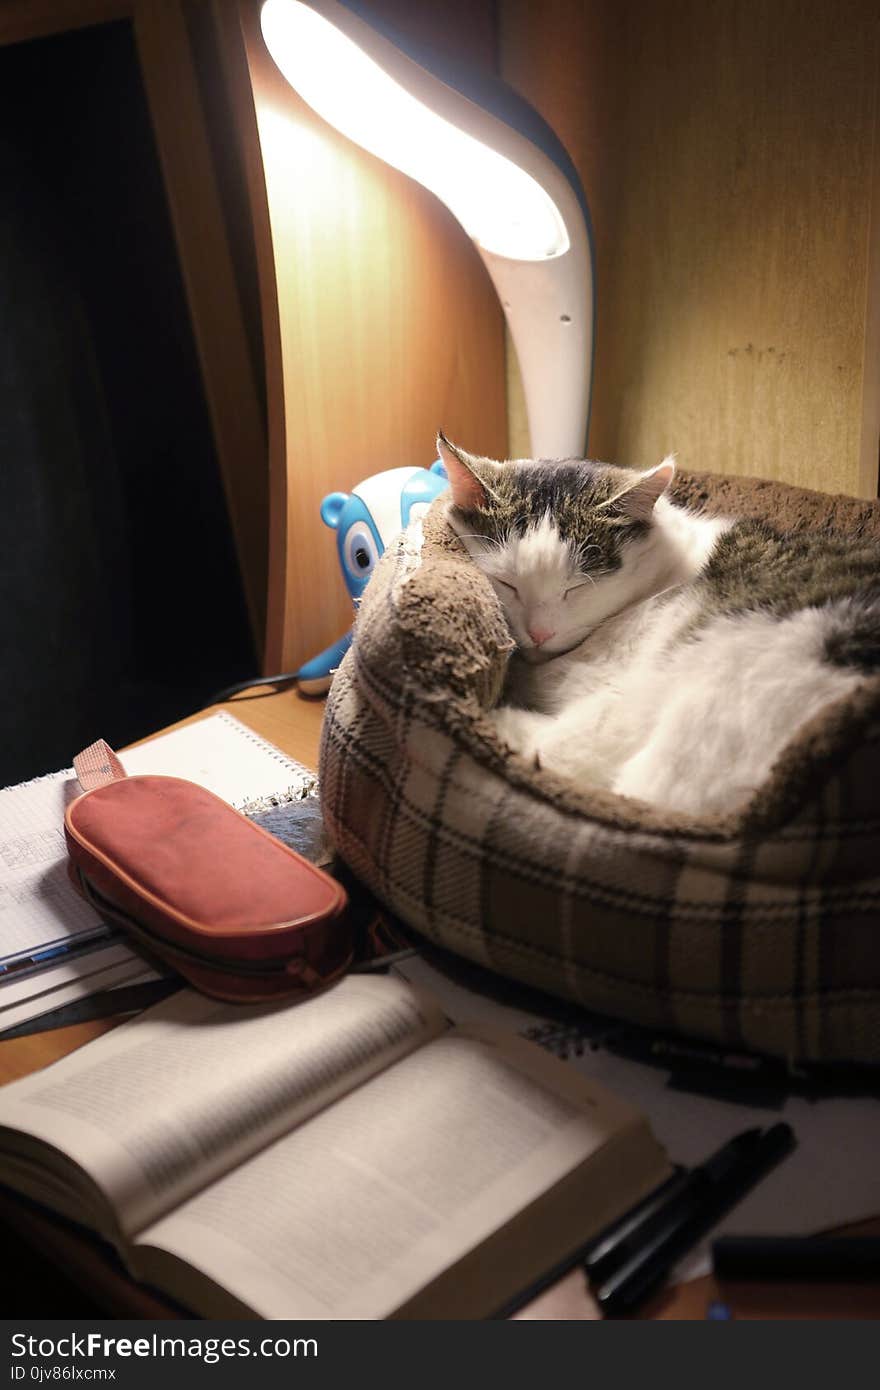 School kid desk with lamp opened book and cat in catbed